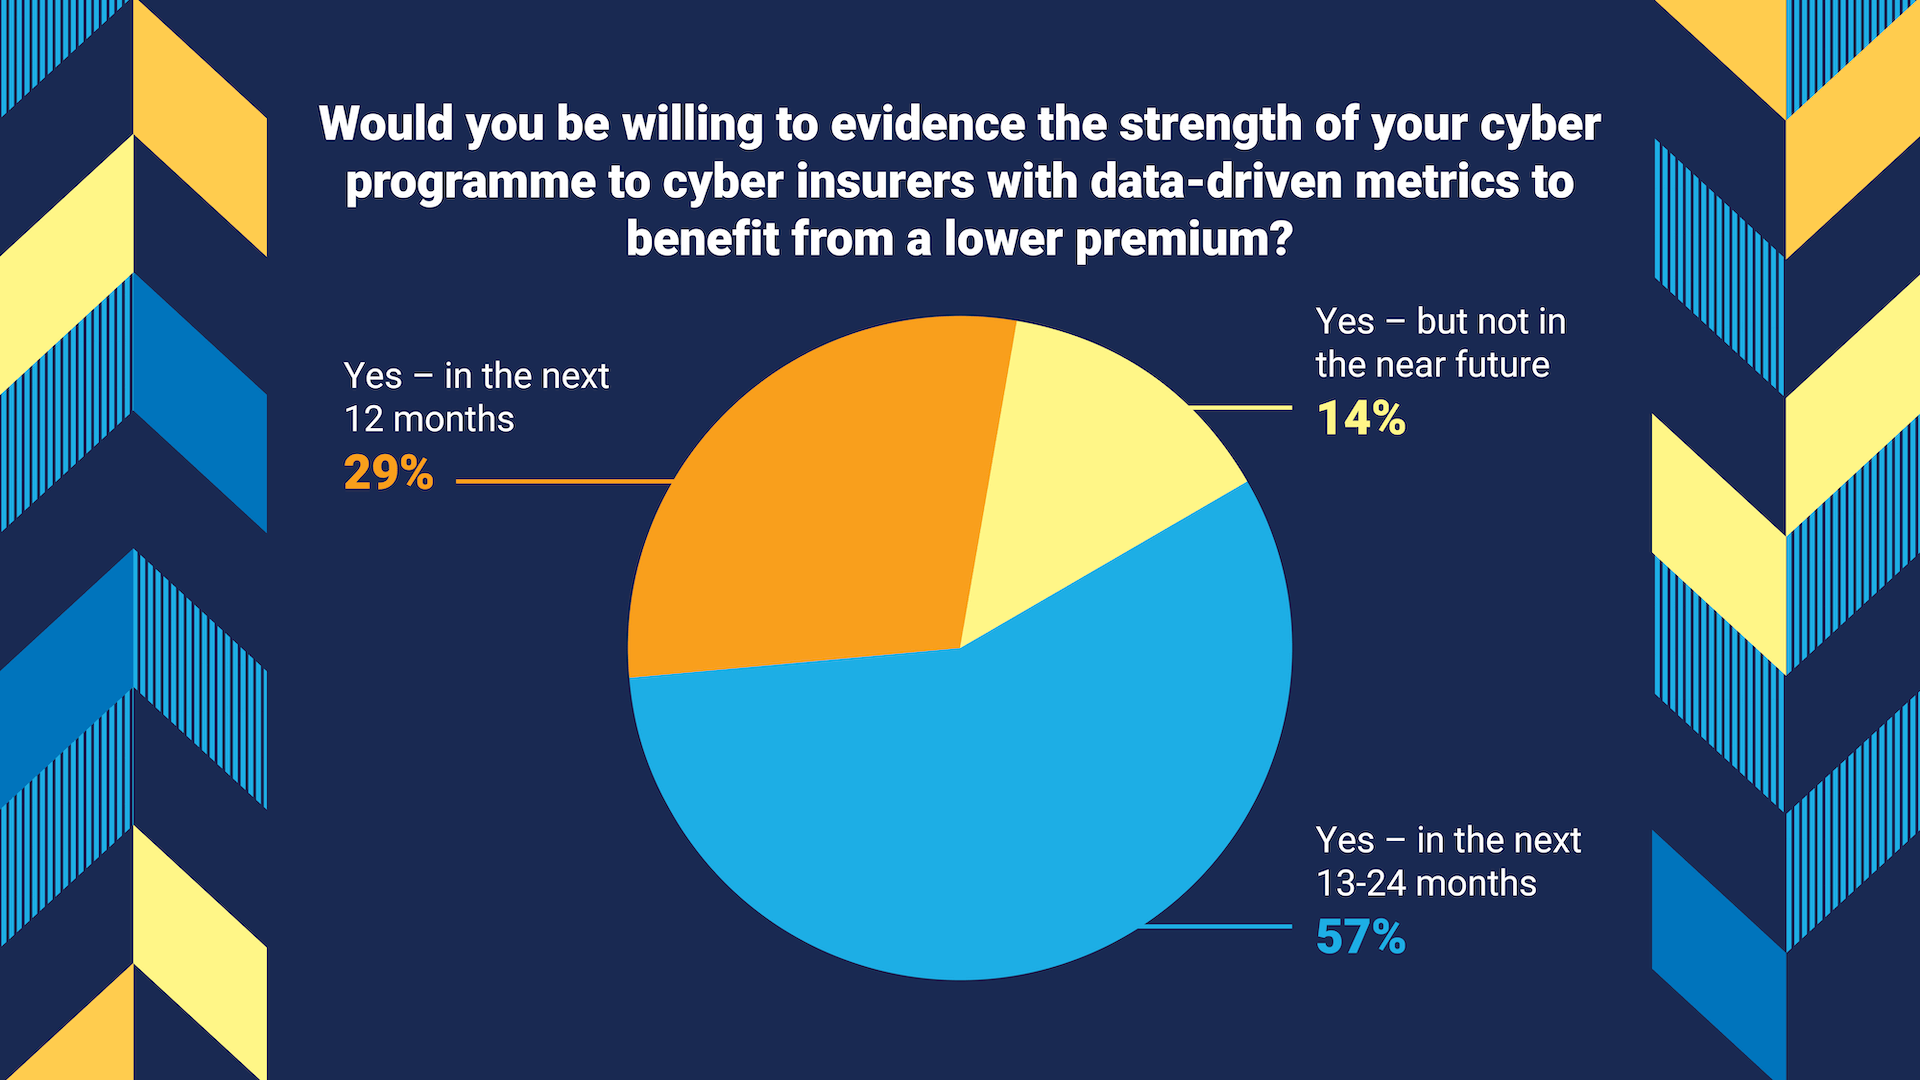 Would you be willing to evidence the strength of your cyber programme to cyber insurers with data-driven metrics to benefit from a lower premium?